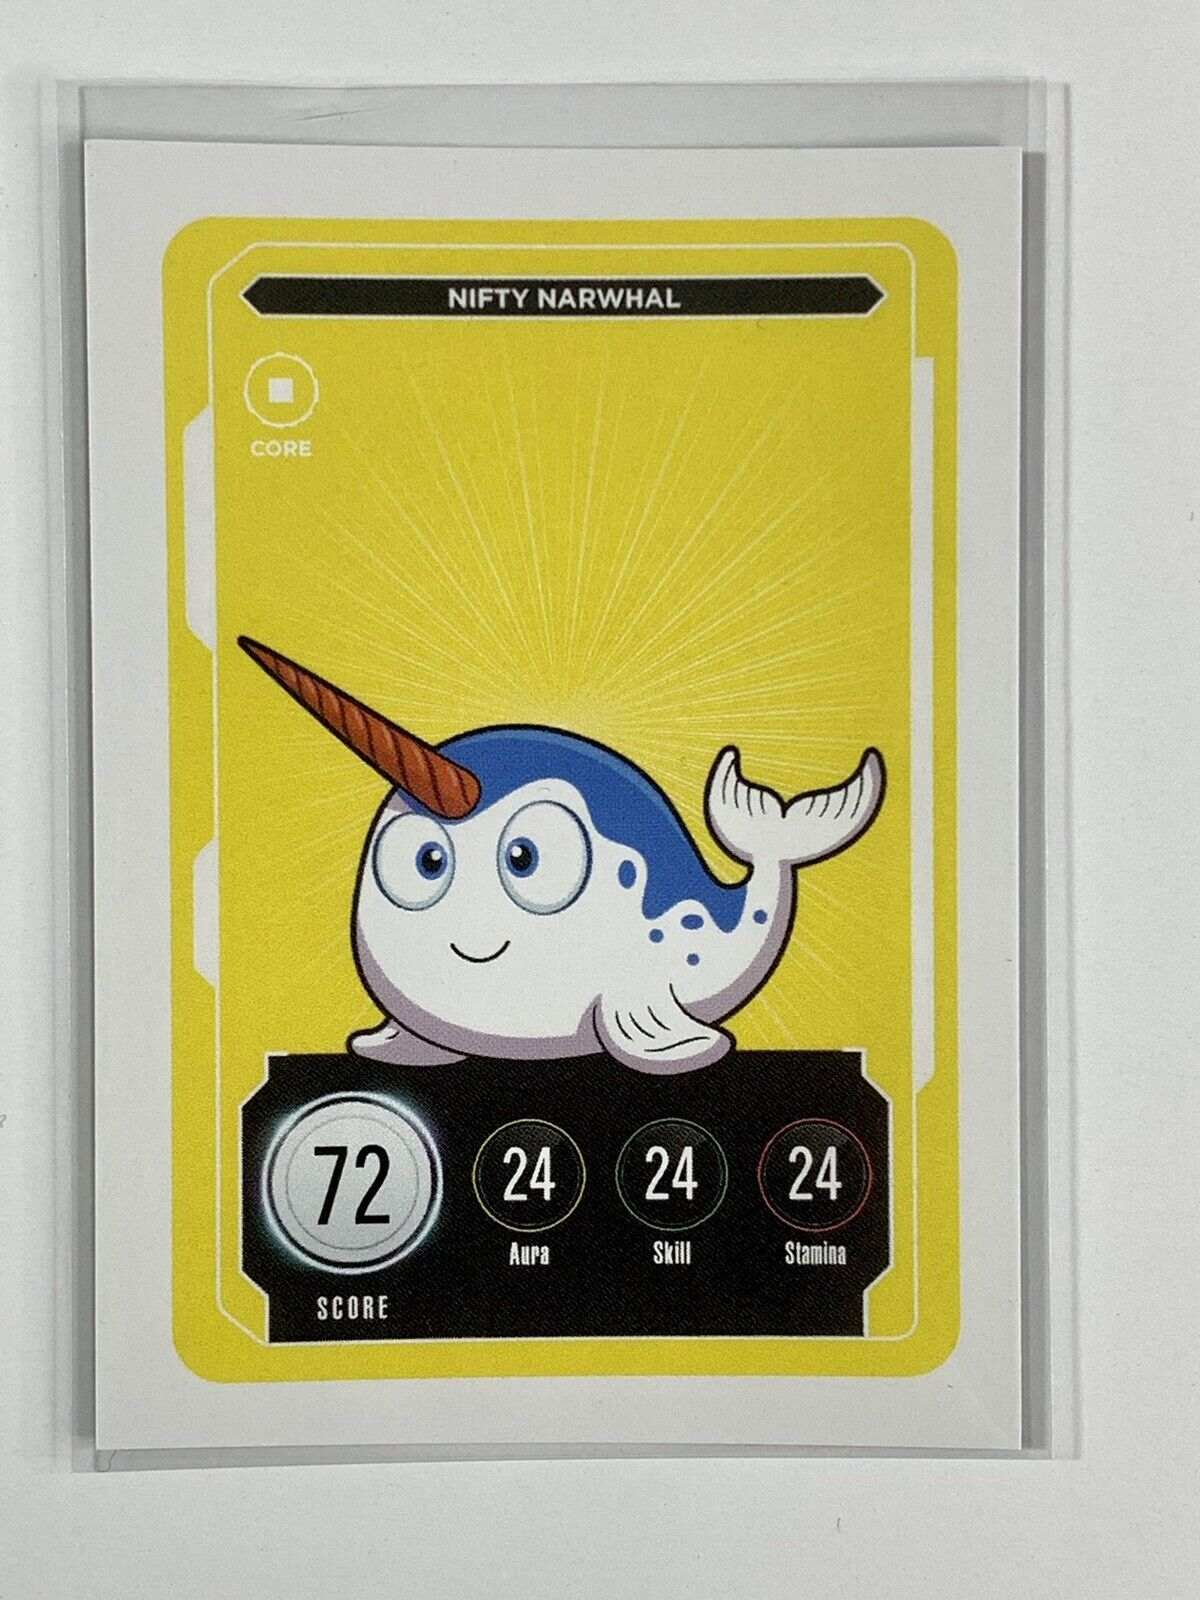 NIFTY NARWHAL VeeFriends Compete And Collect Card Core Series 2 ZeroCool GaryVee